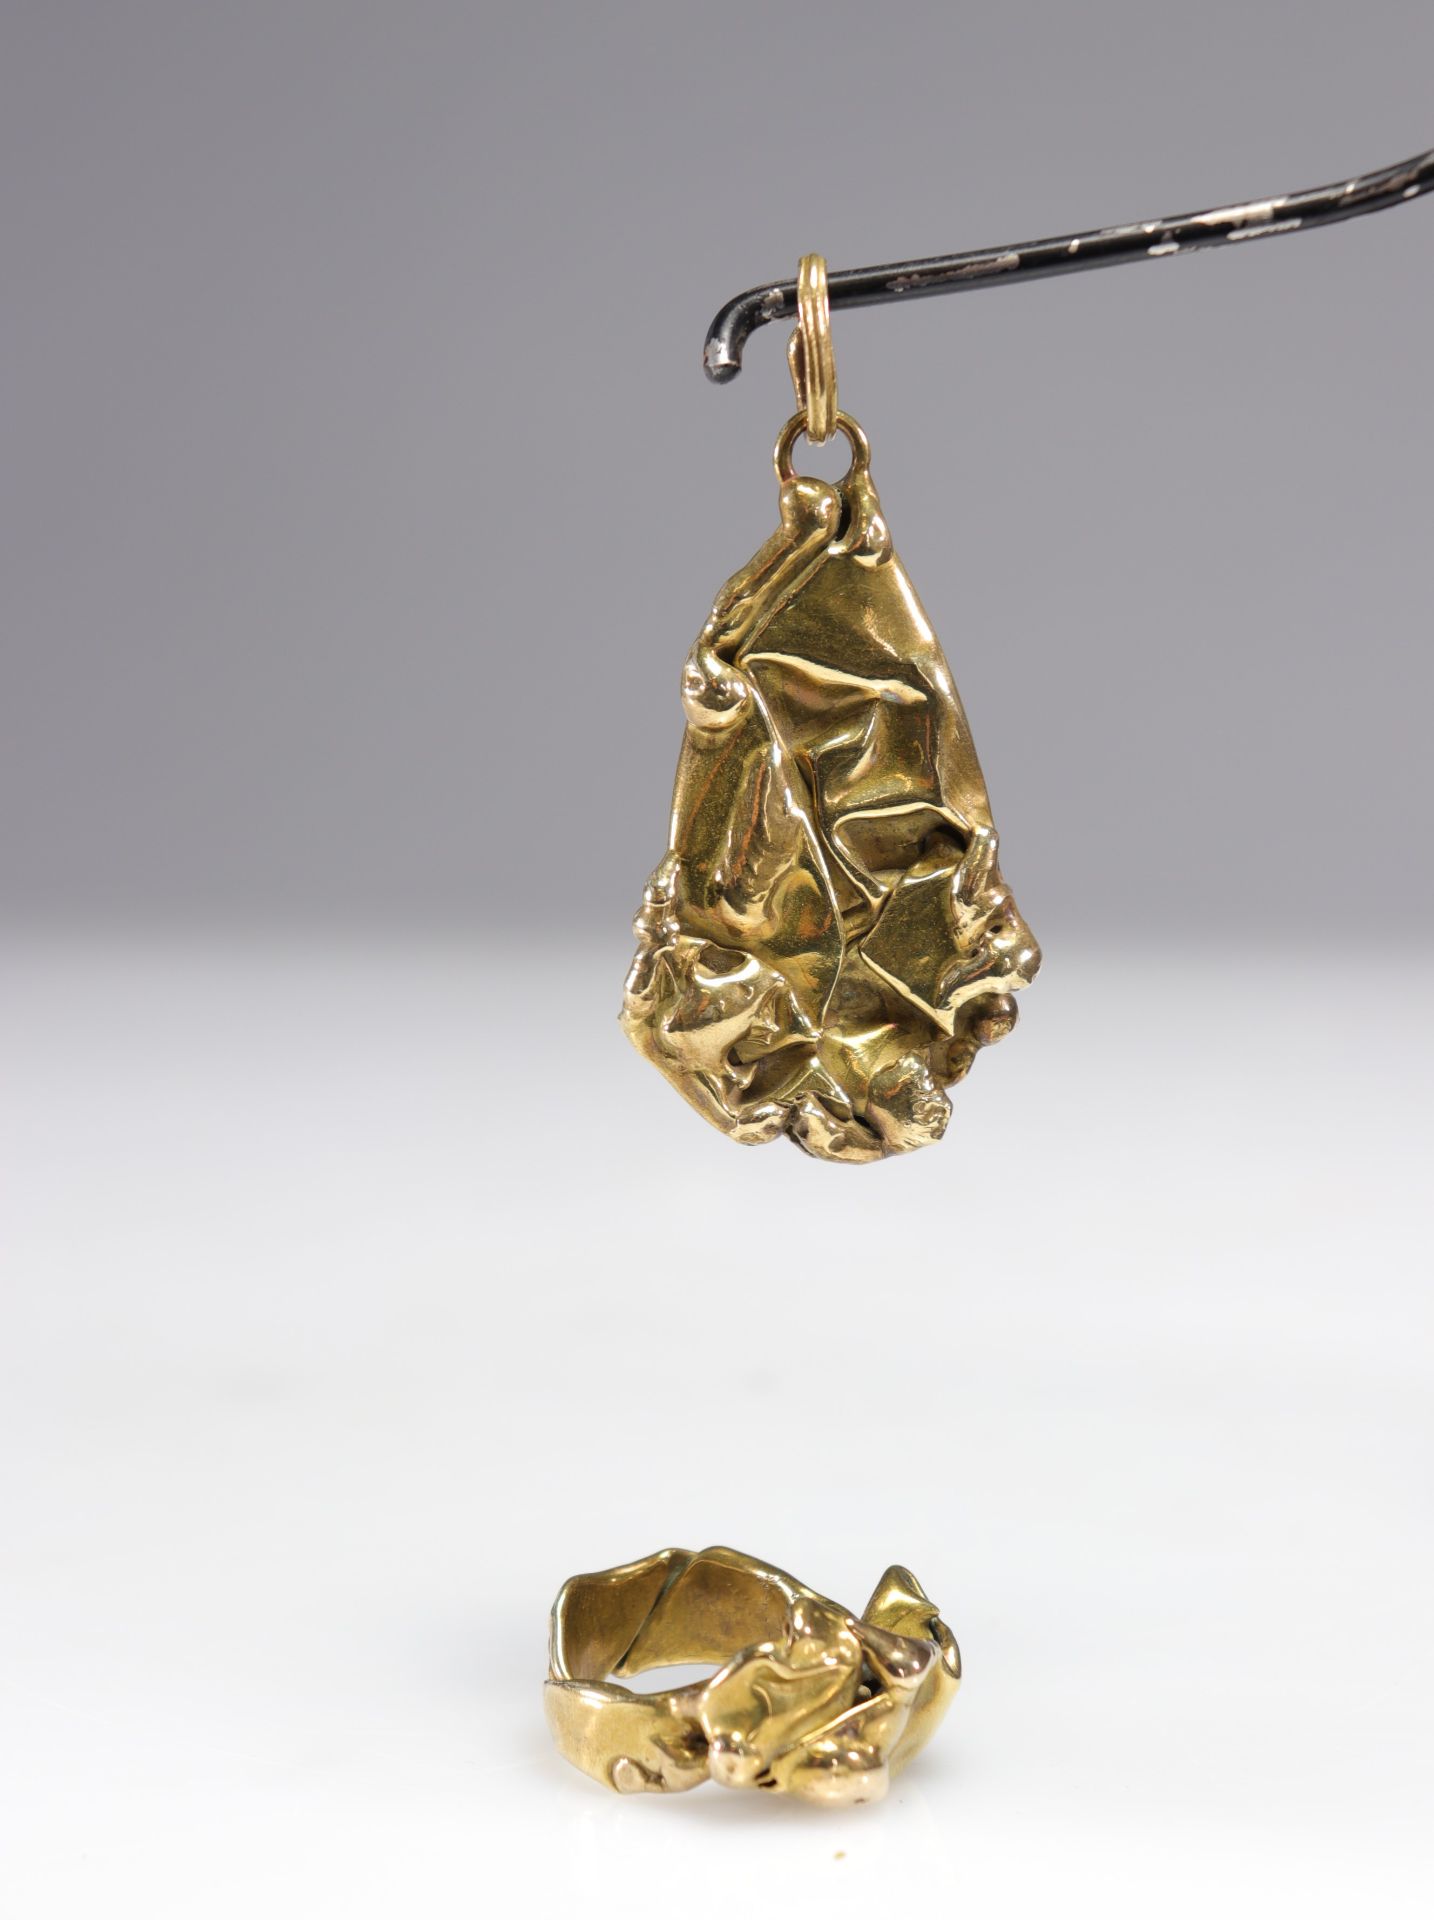 Cesar Baldaccini (Attr). Cuts. Jewelry set comprising a pendant and a brass ring, compressed and wel